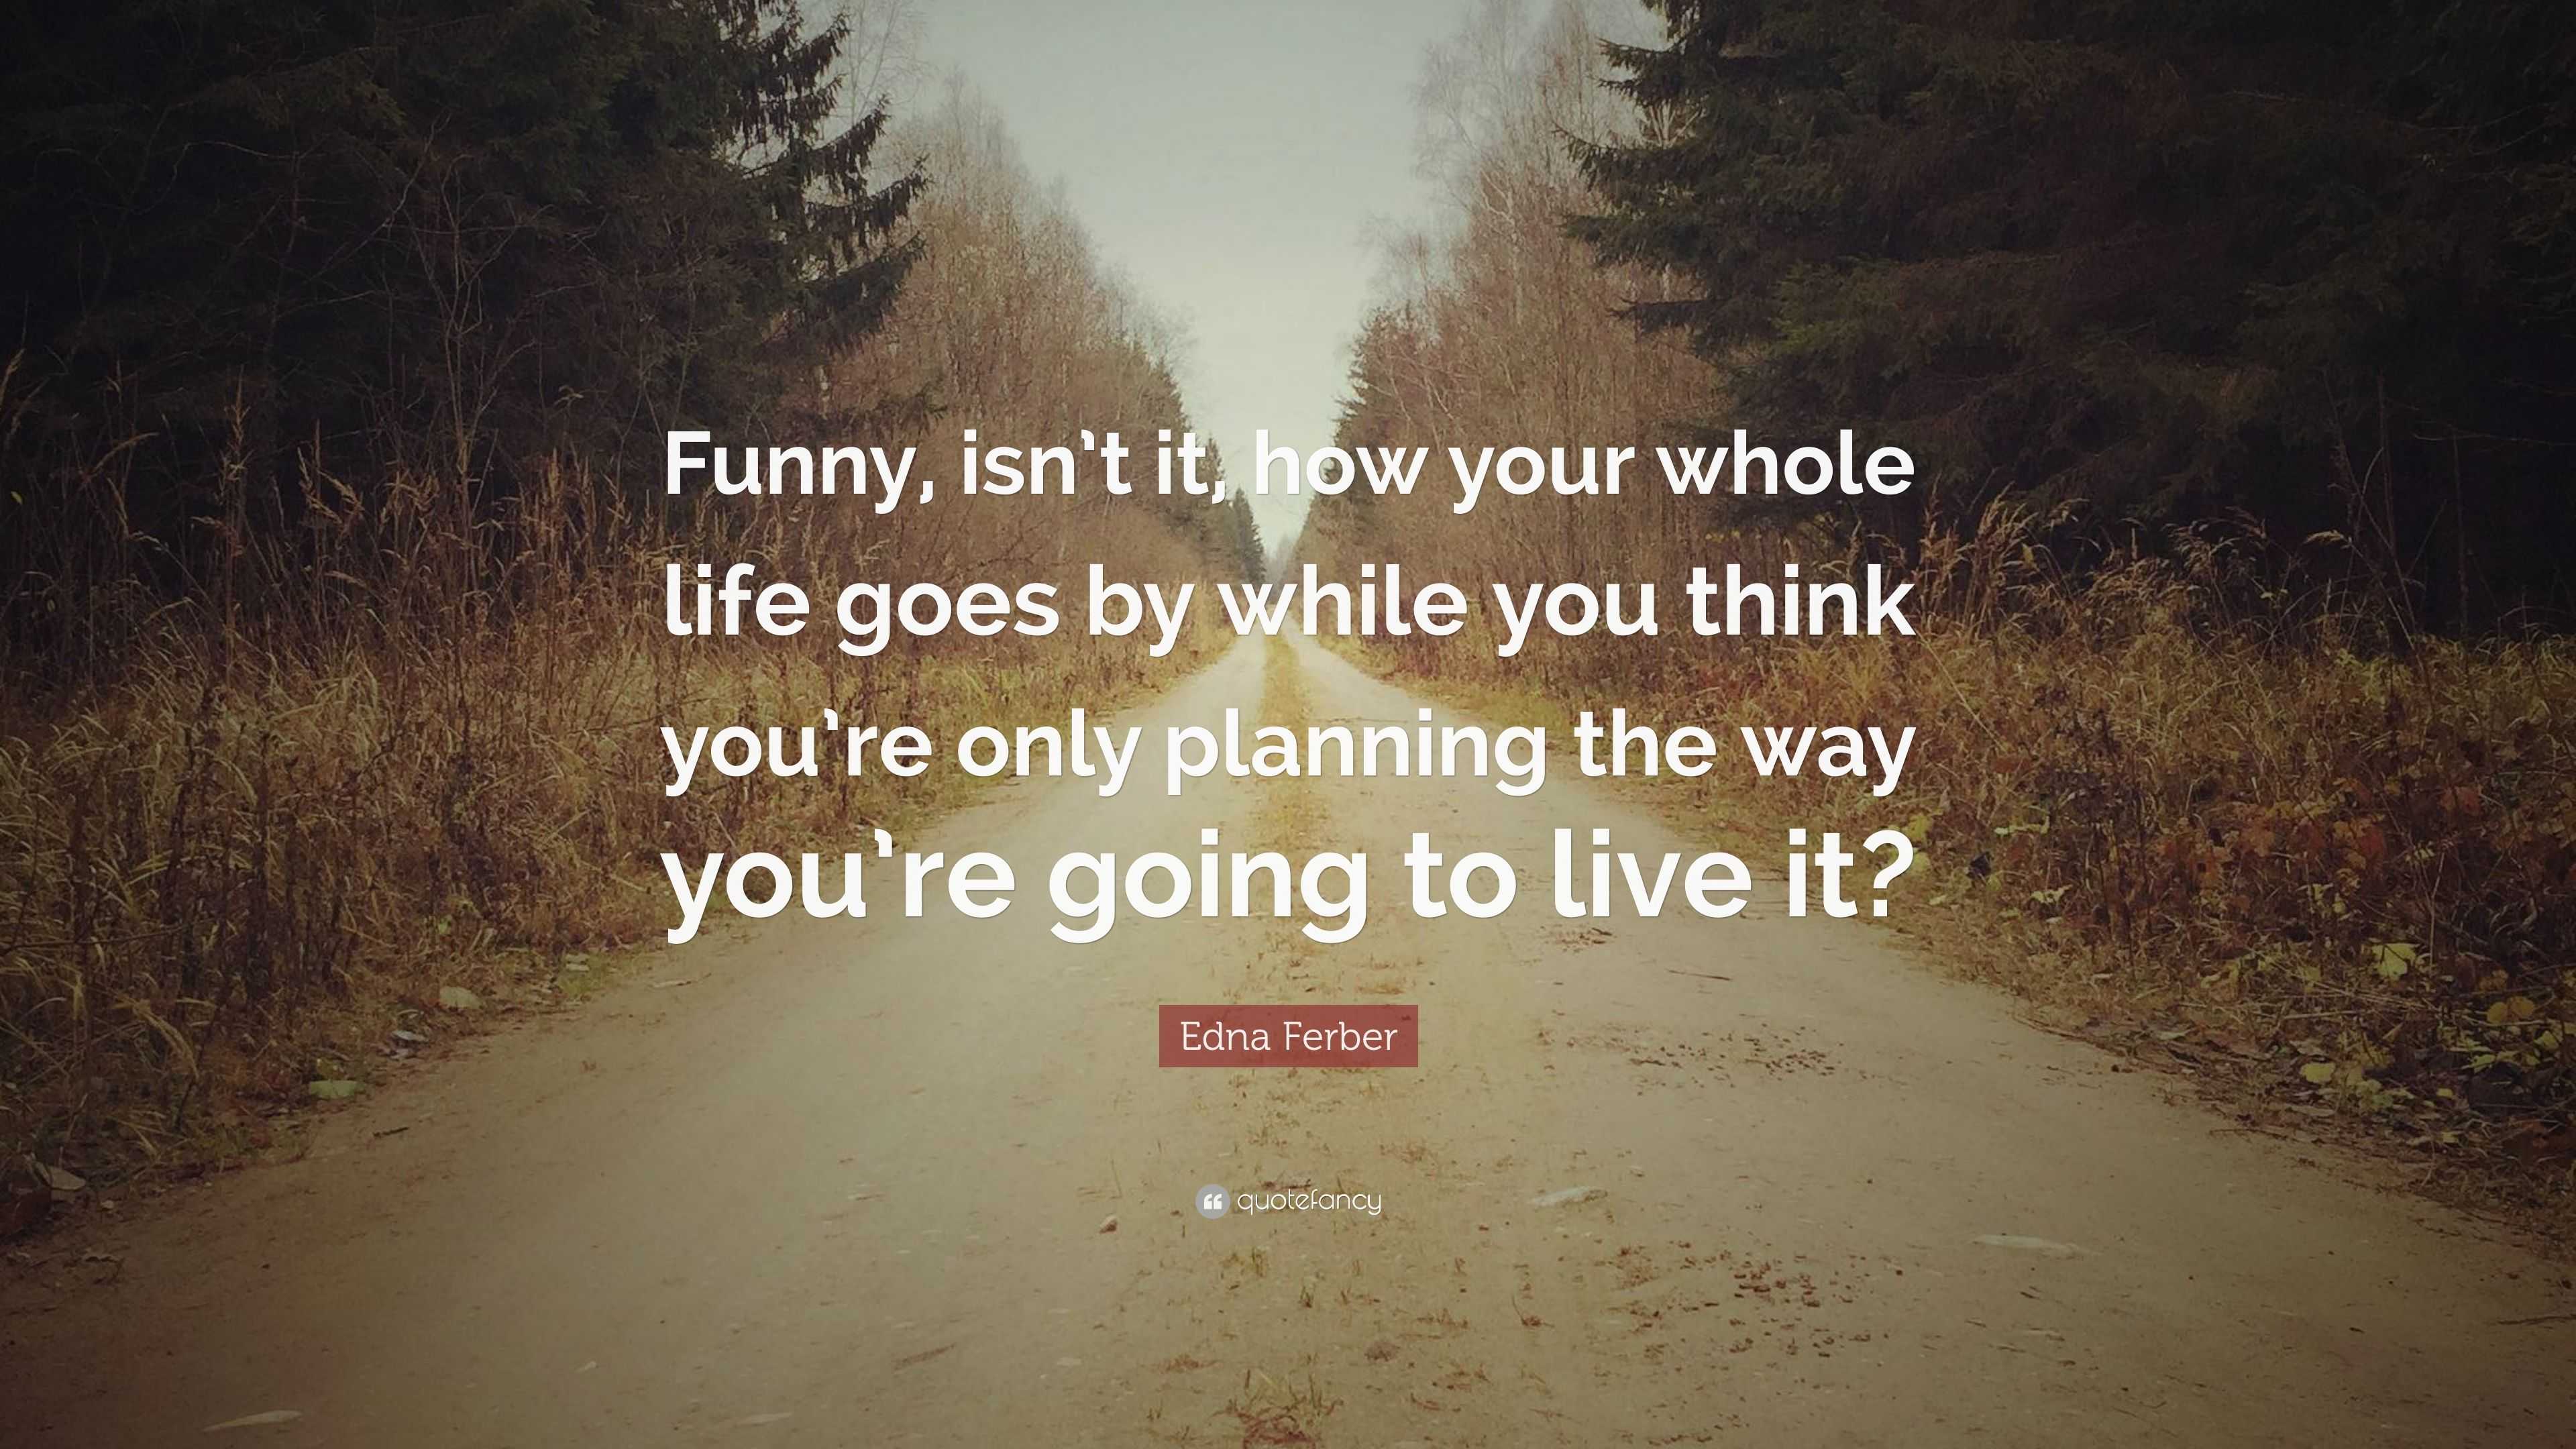 Edna Ferber Quote: “Funny, isn't it, how your whole life goes by while you  think